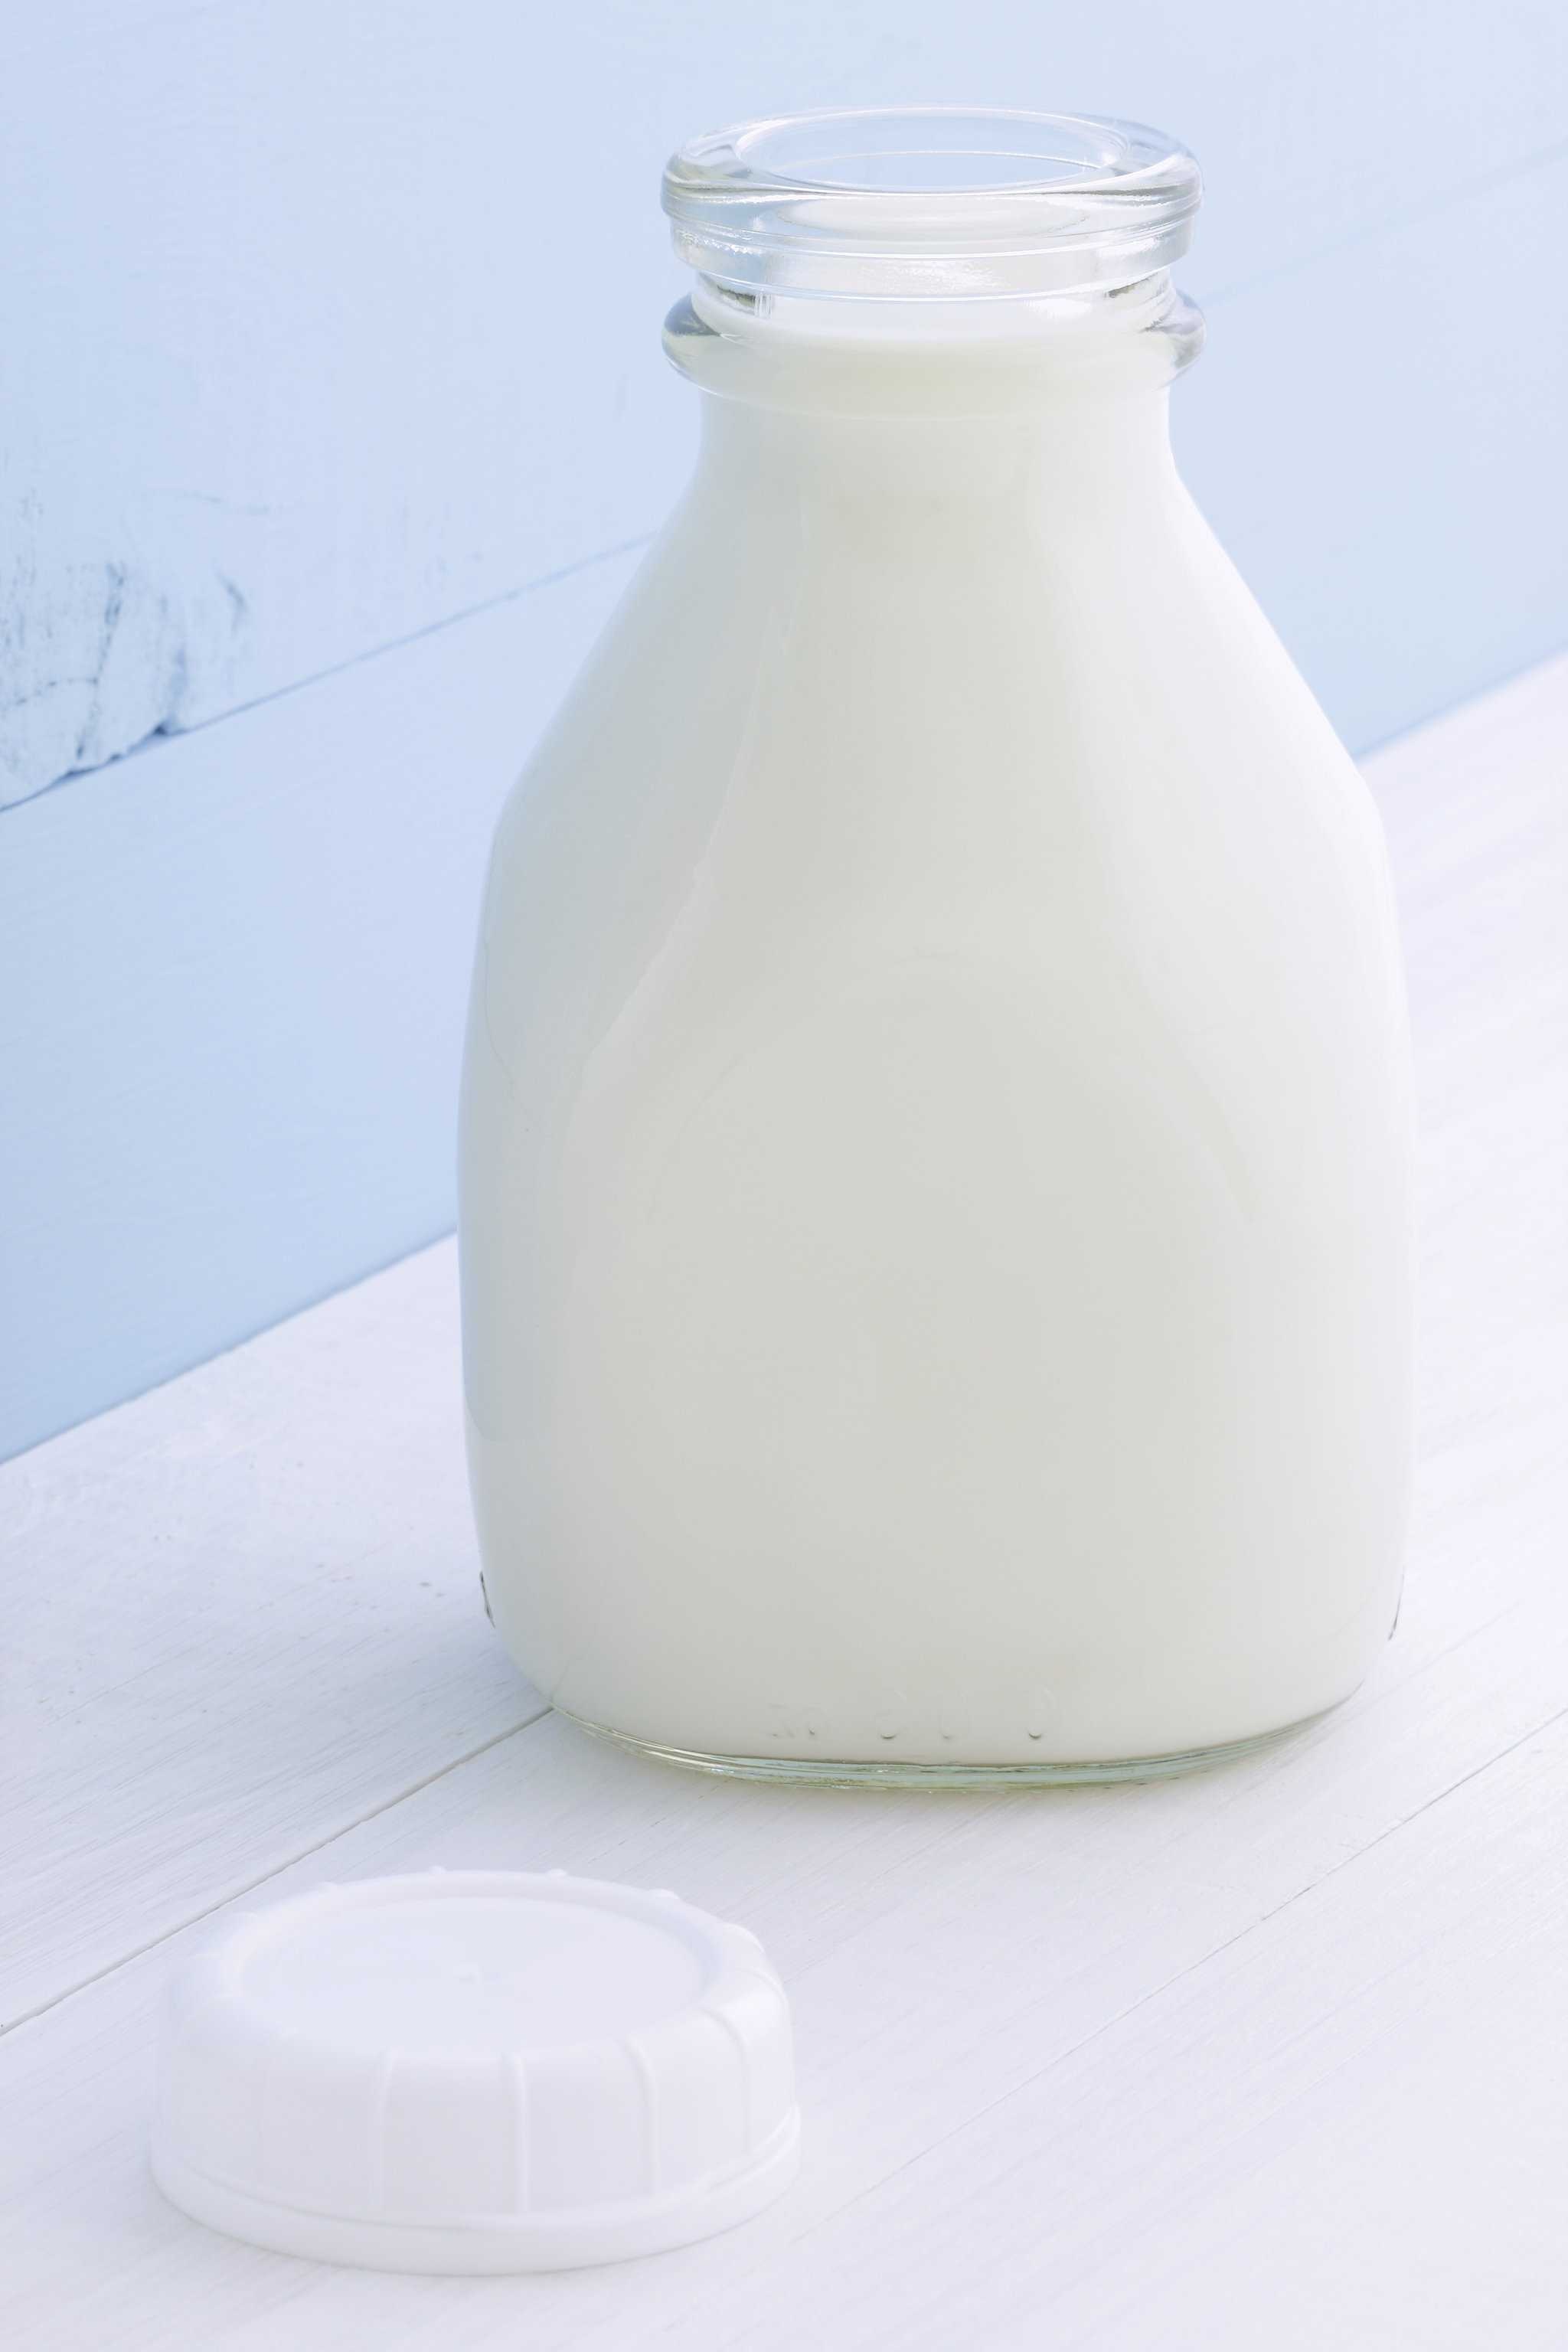 Dairy product image classifcation dataset for machine learning